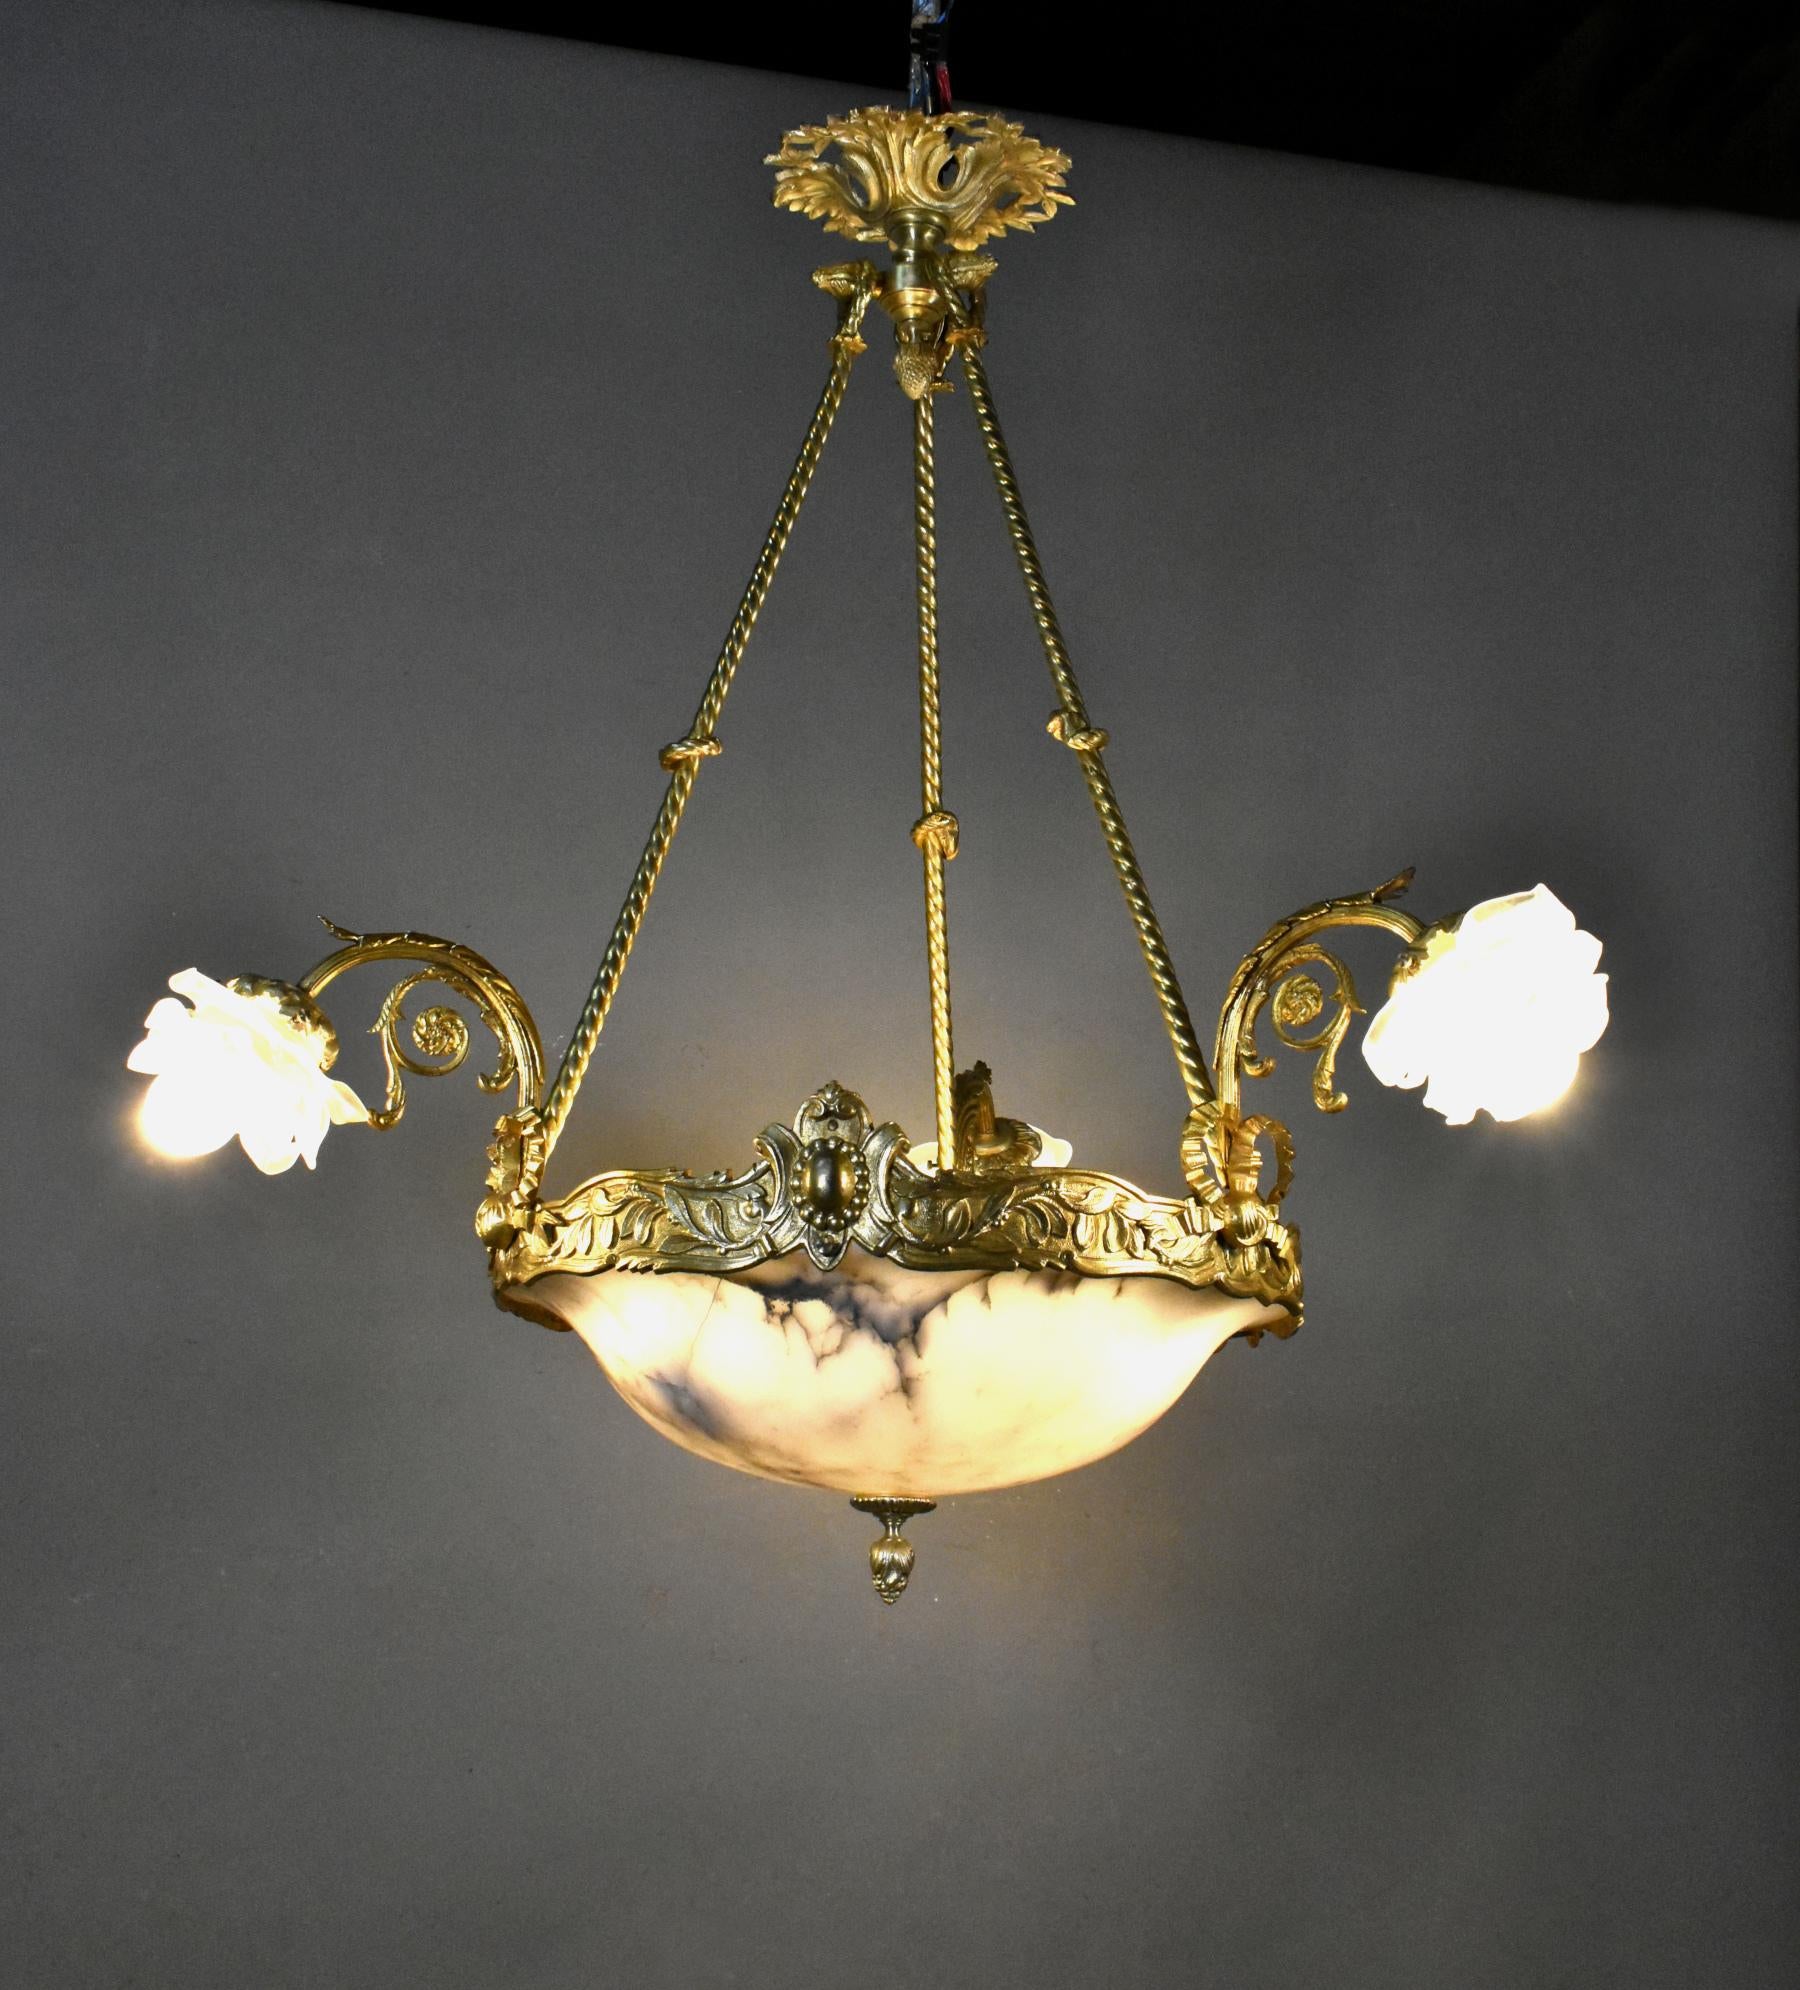 French Antique Bronze & Marble Alabaster Chandelier (1890) Napoleon III 

This large and impressive bronze chandelier stems from an acanthus leaf ceiling rose via three twisted bronze arms to its main central decorative crown. 

The crown is